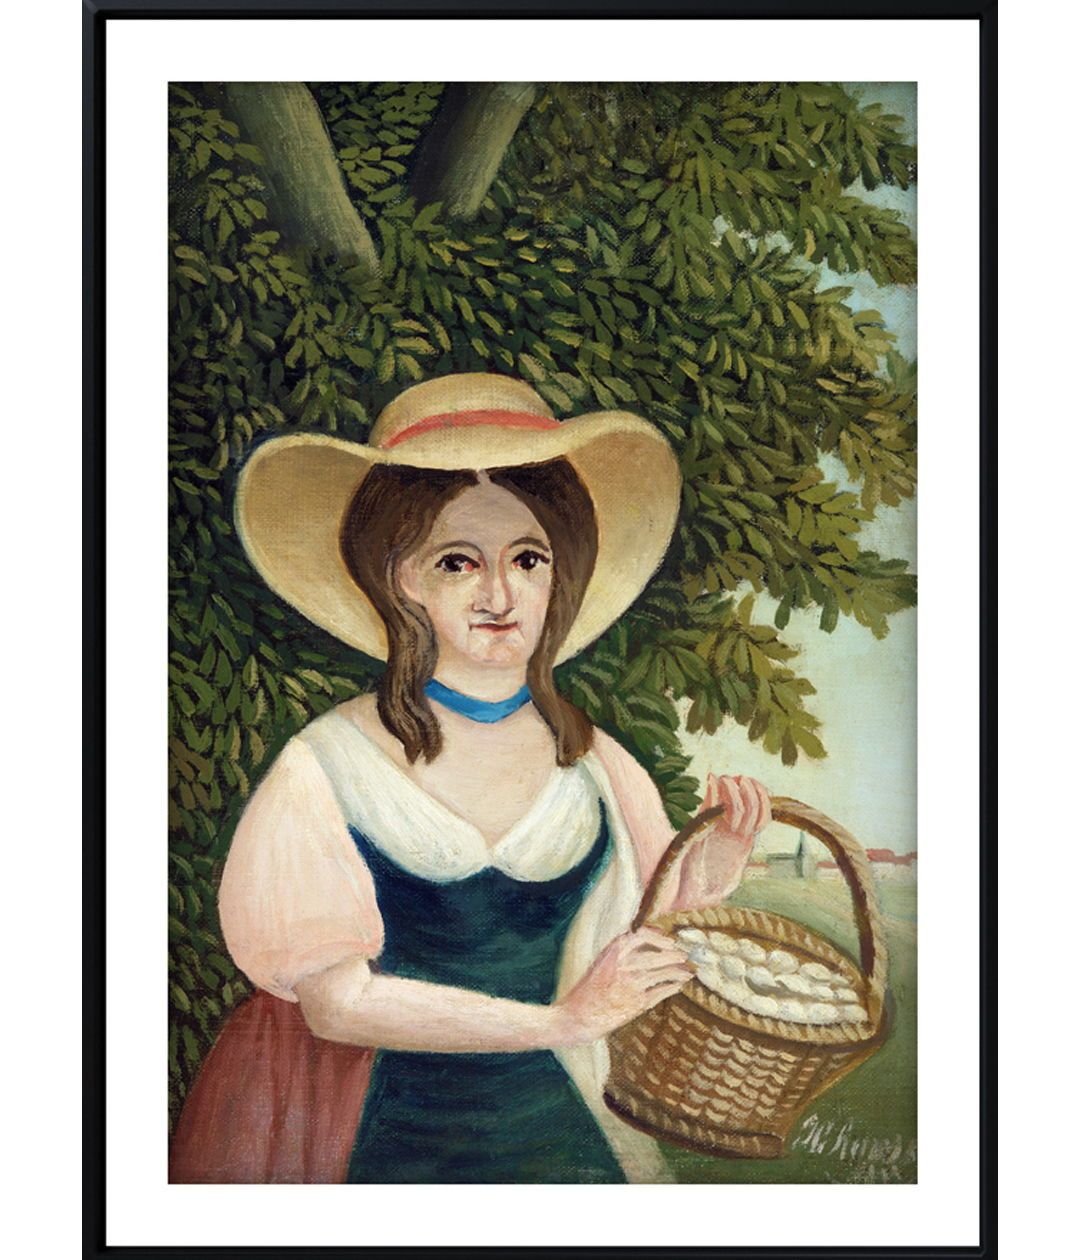 Woman with Basket of Eggs